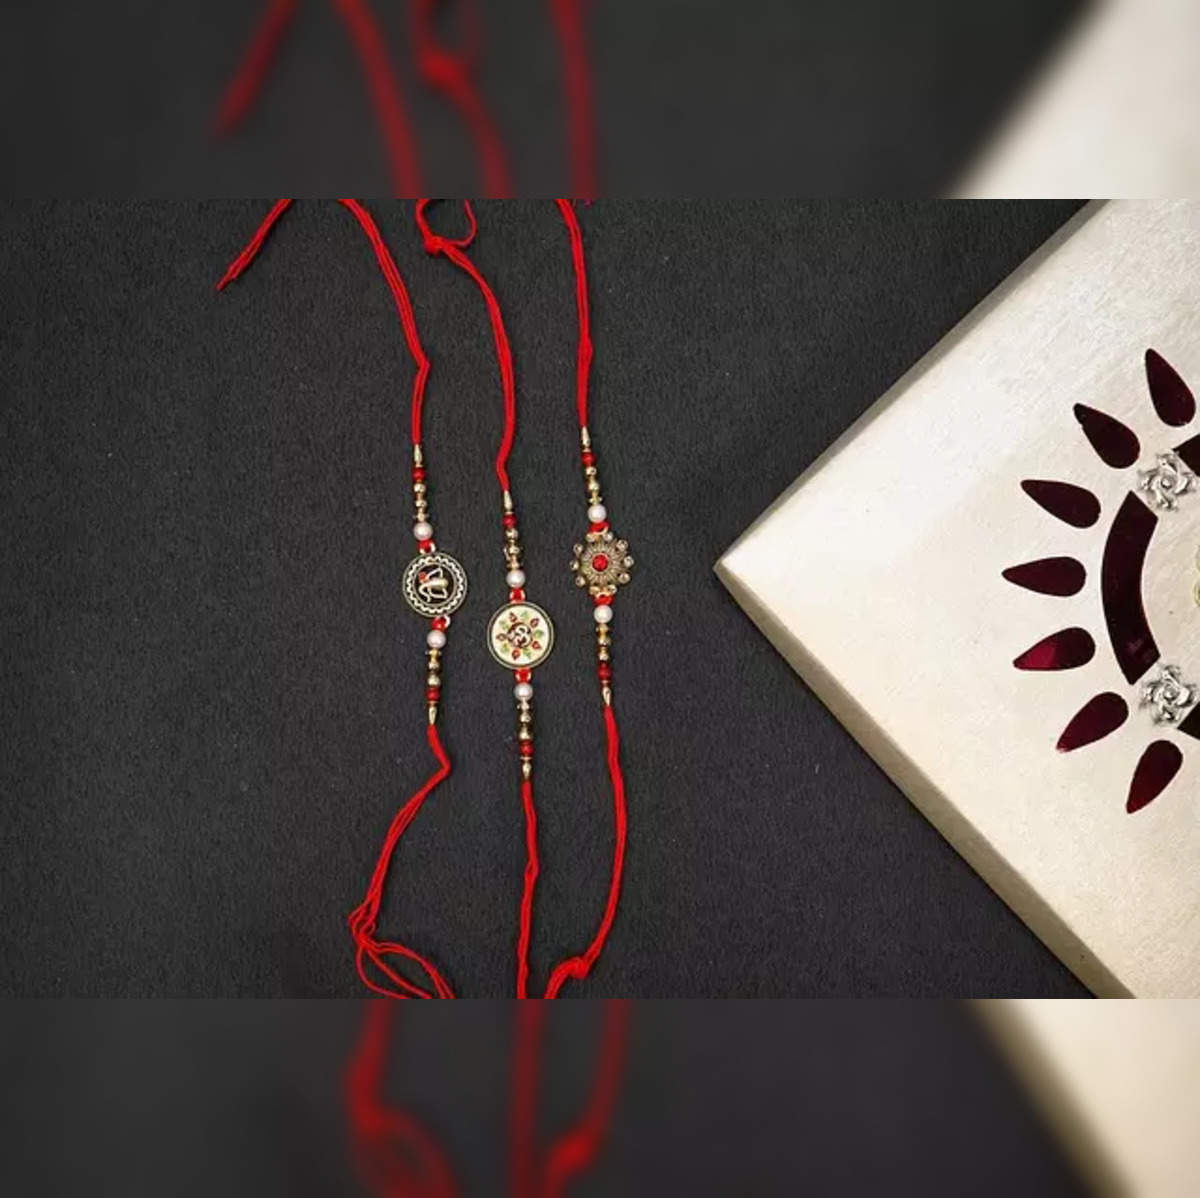 best rakhi gifts show your love with thoughtful presents